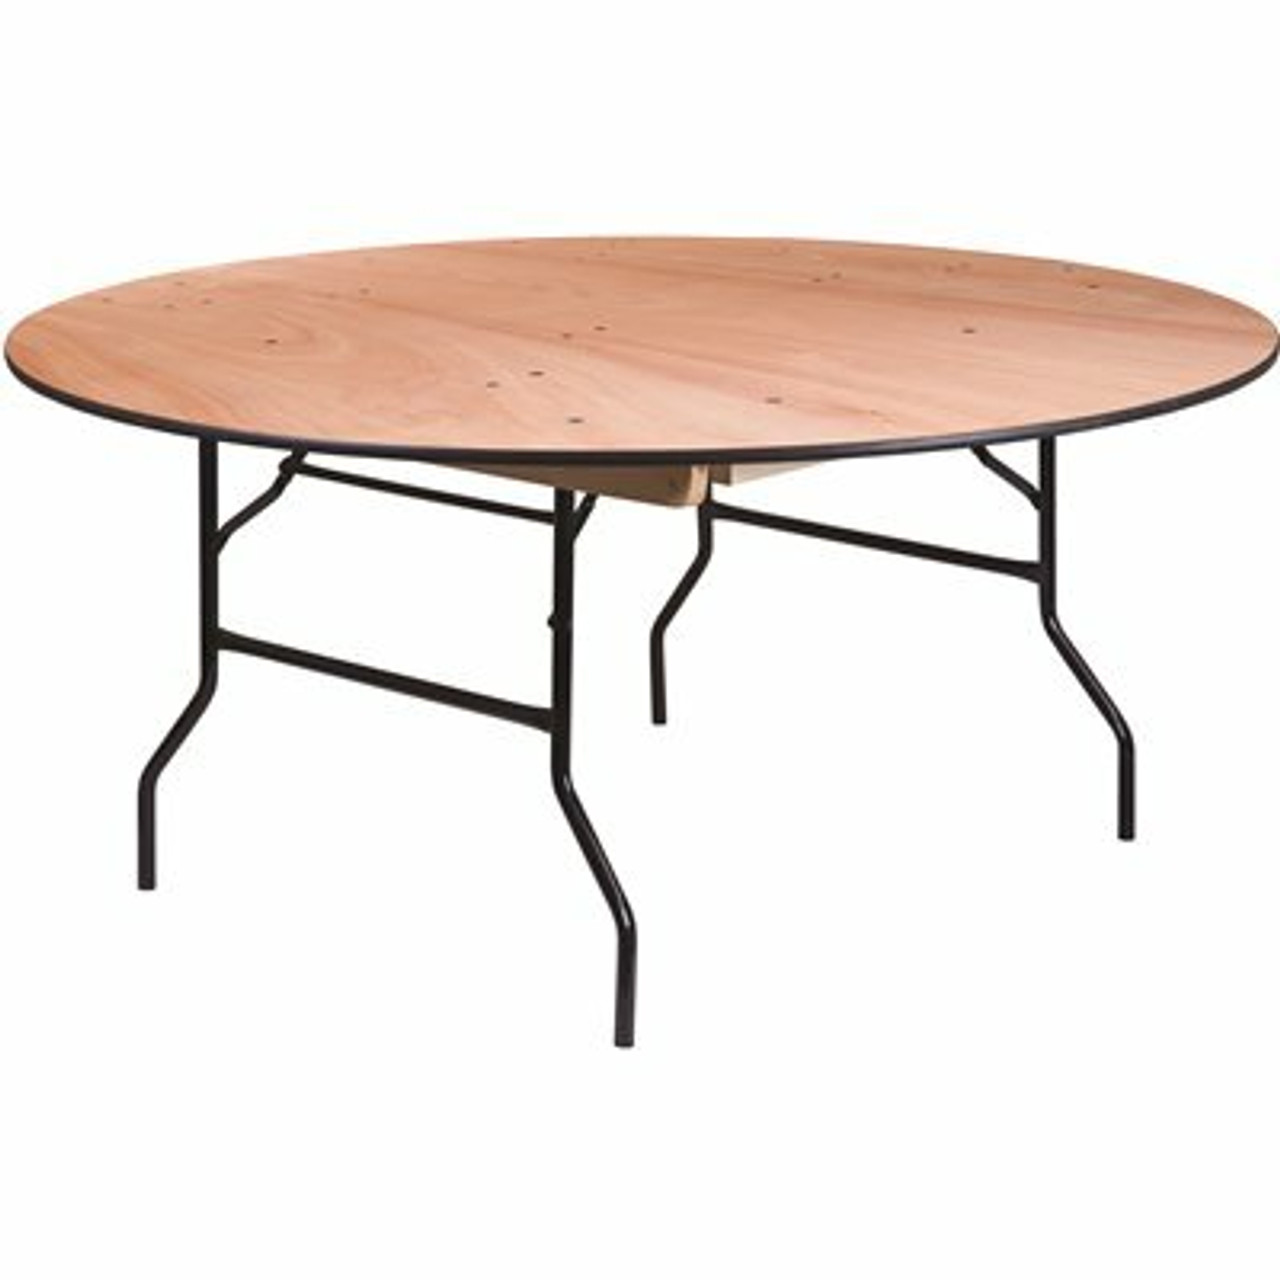 66 In. Natural Wood Tabletop Metal Frame Folding Table - 308688198